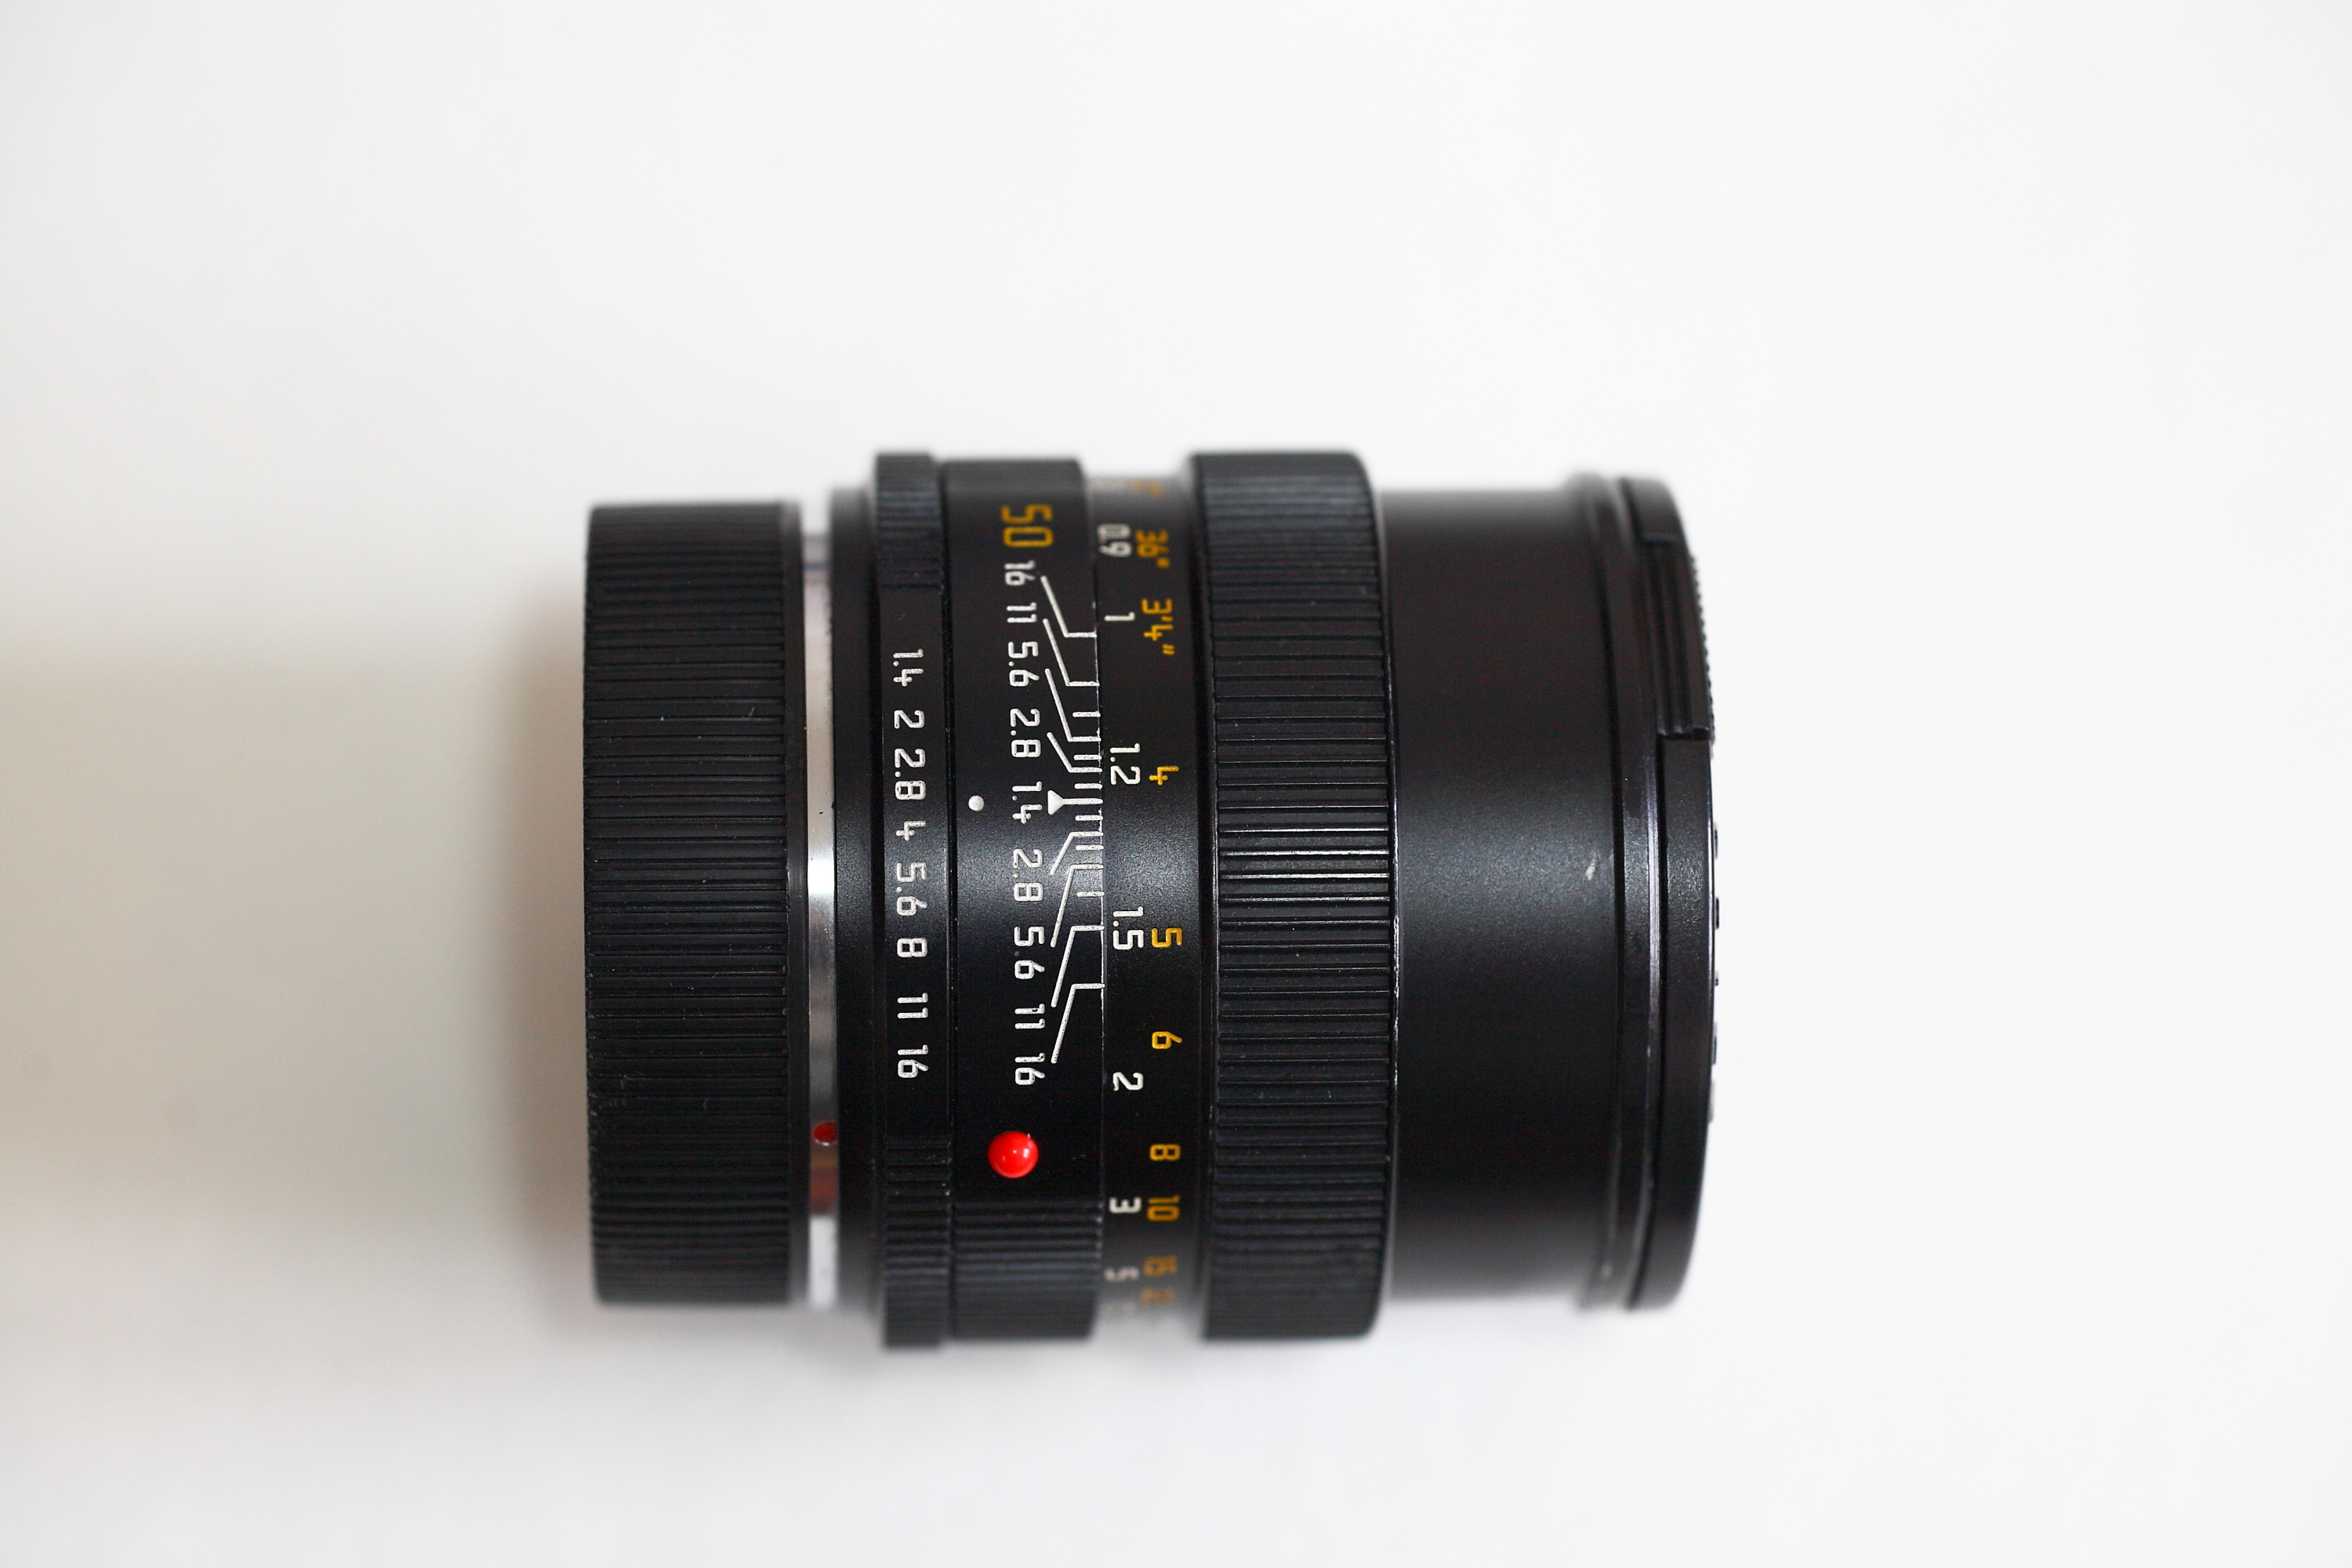  Sell idle R 50 mm f/1.4 at a low price (square version)